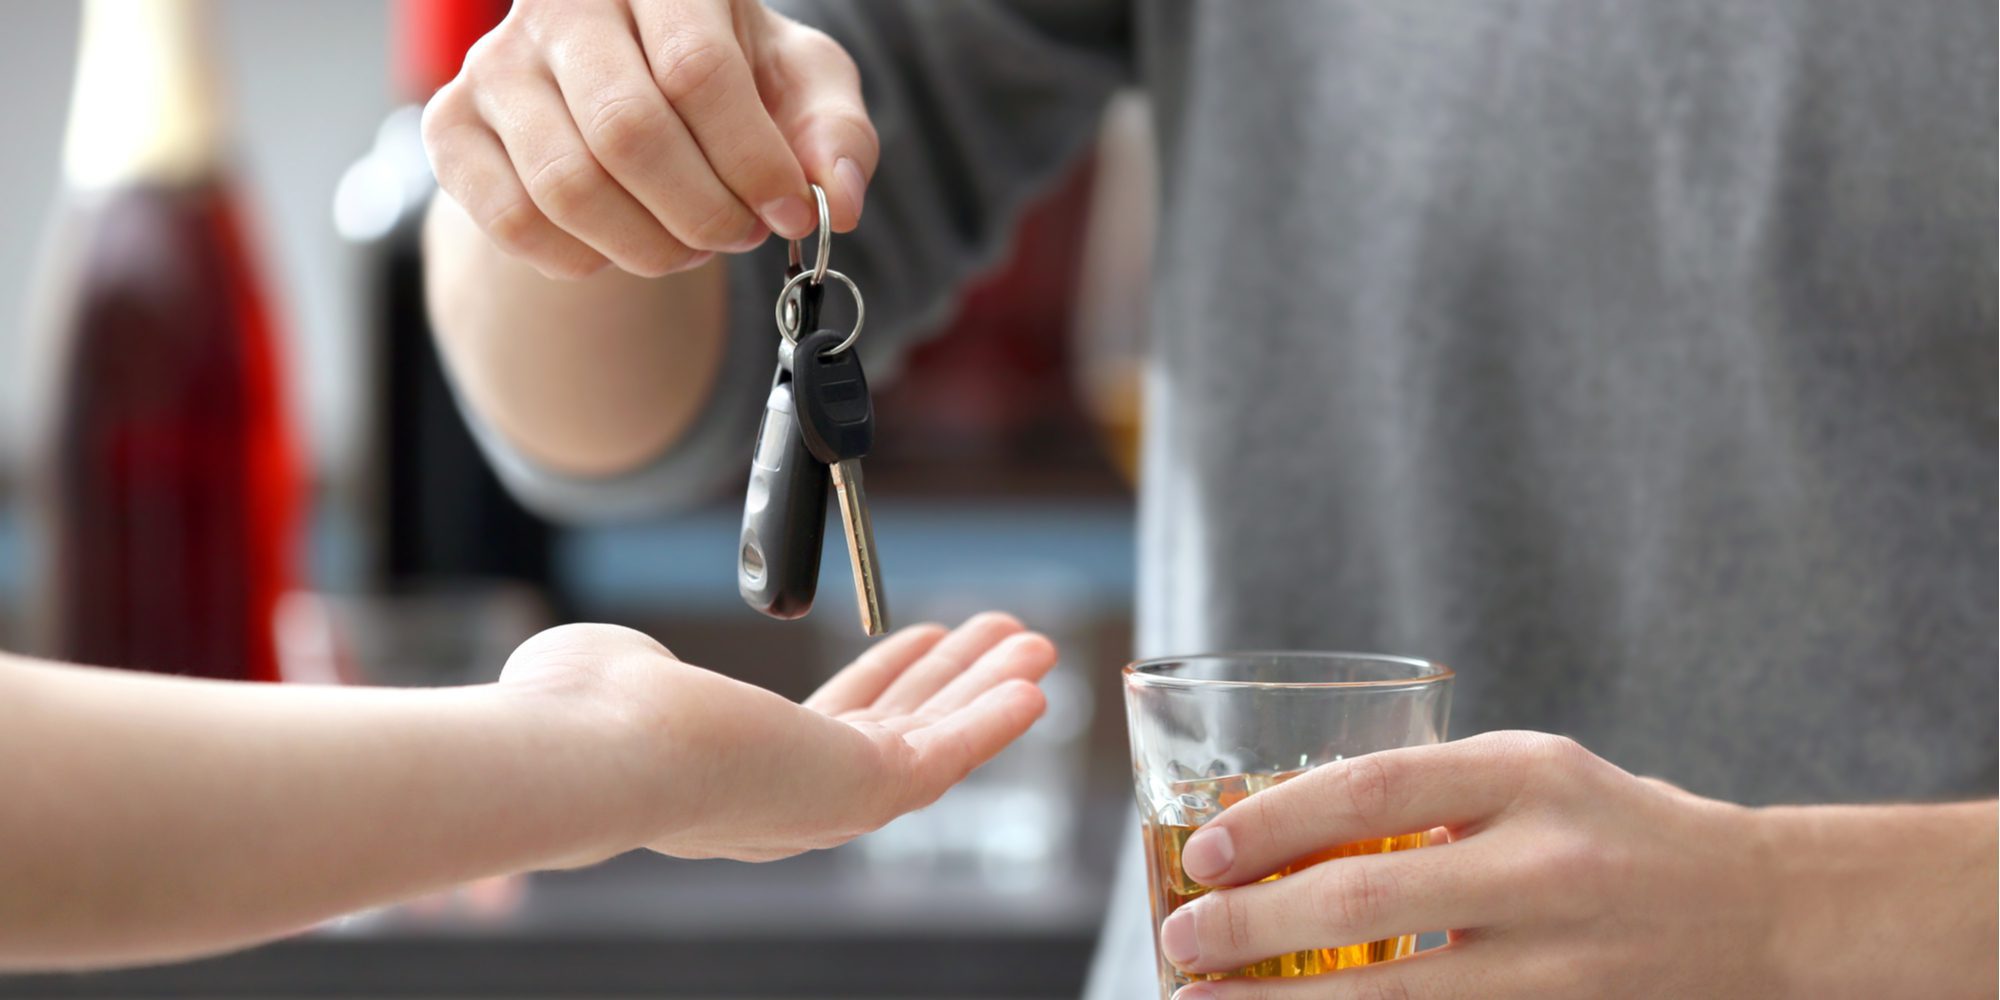 How to Stop Drinking and Driving During Holidays